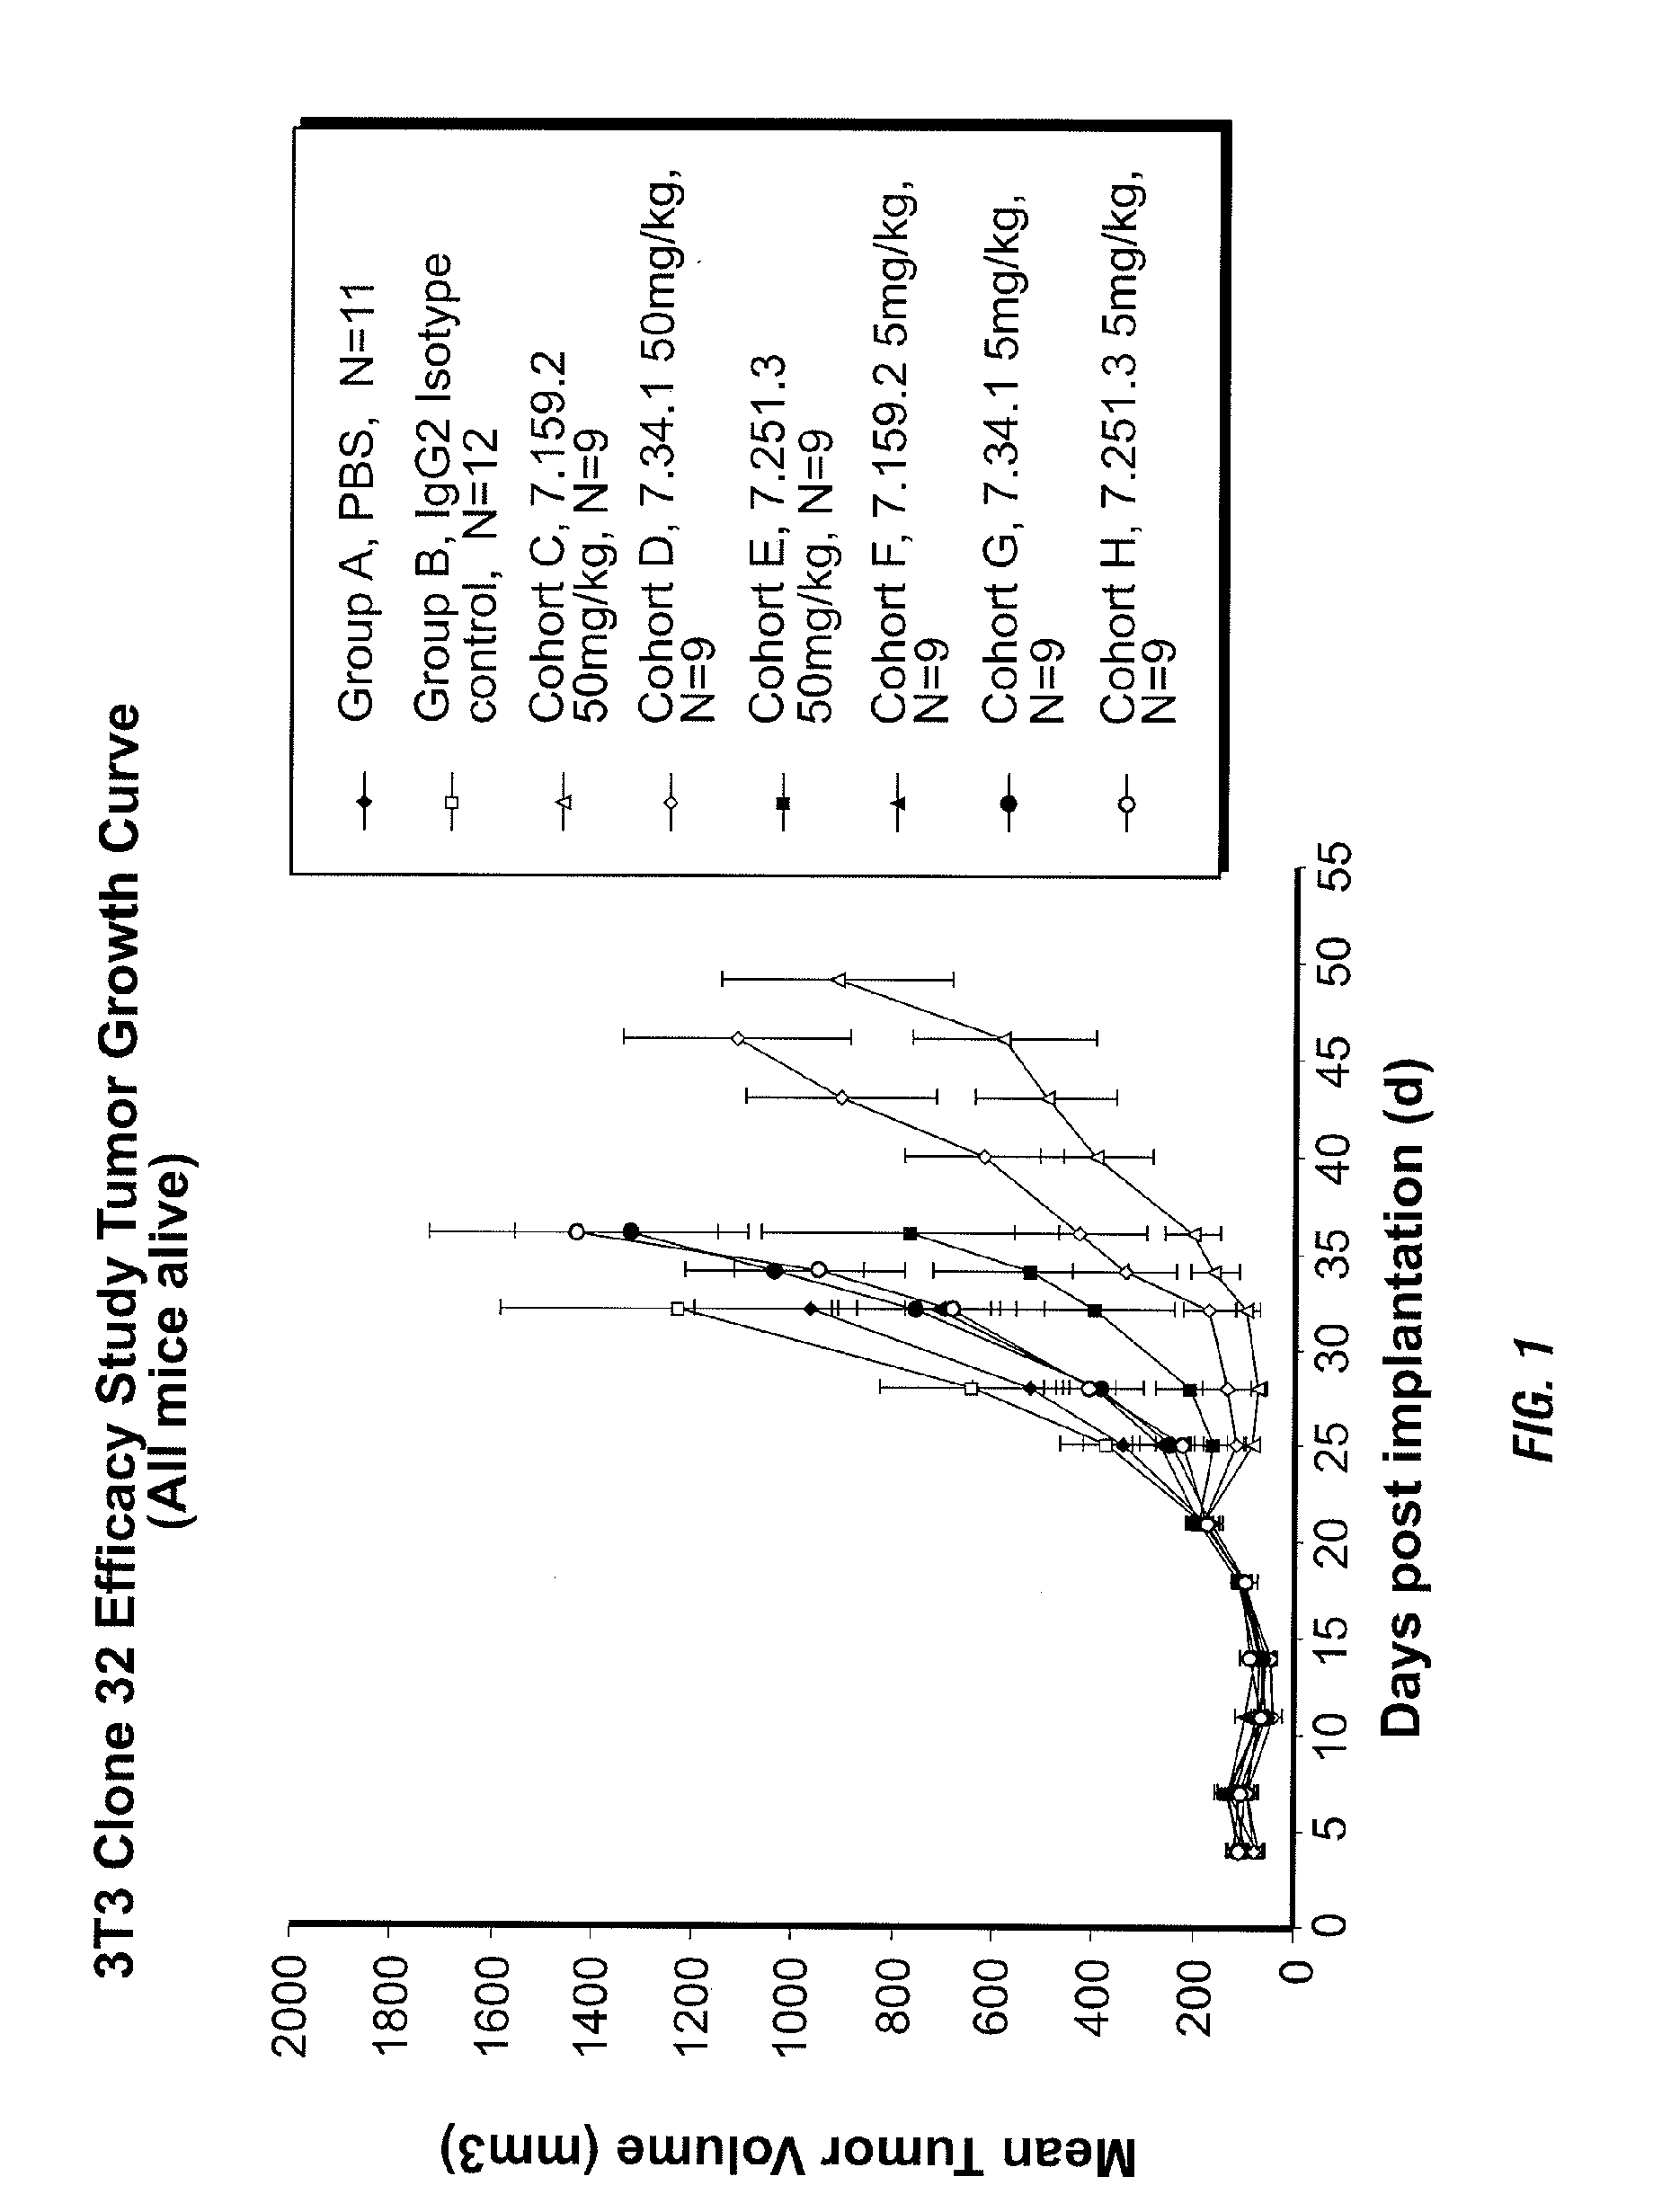 Binding proteins specific for insulin-like growth factors and uses thereof